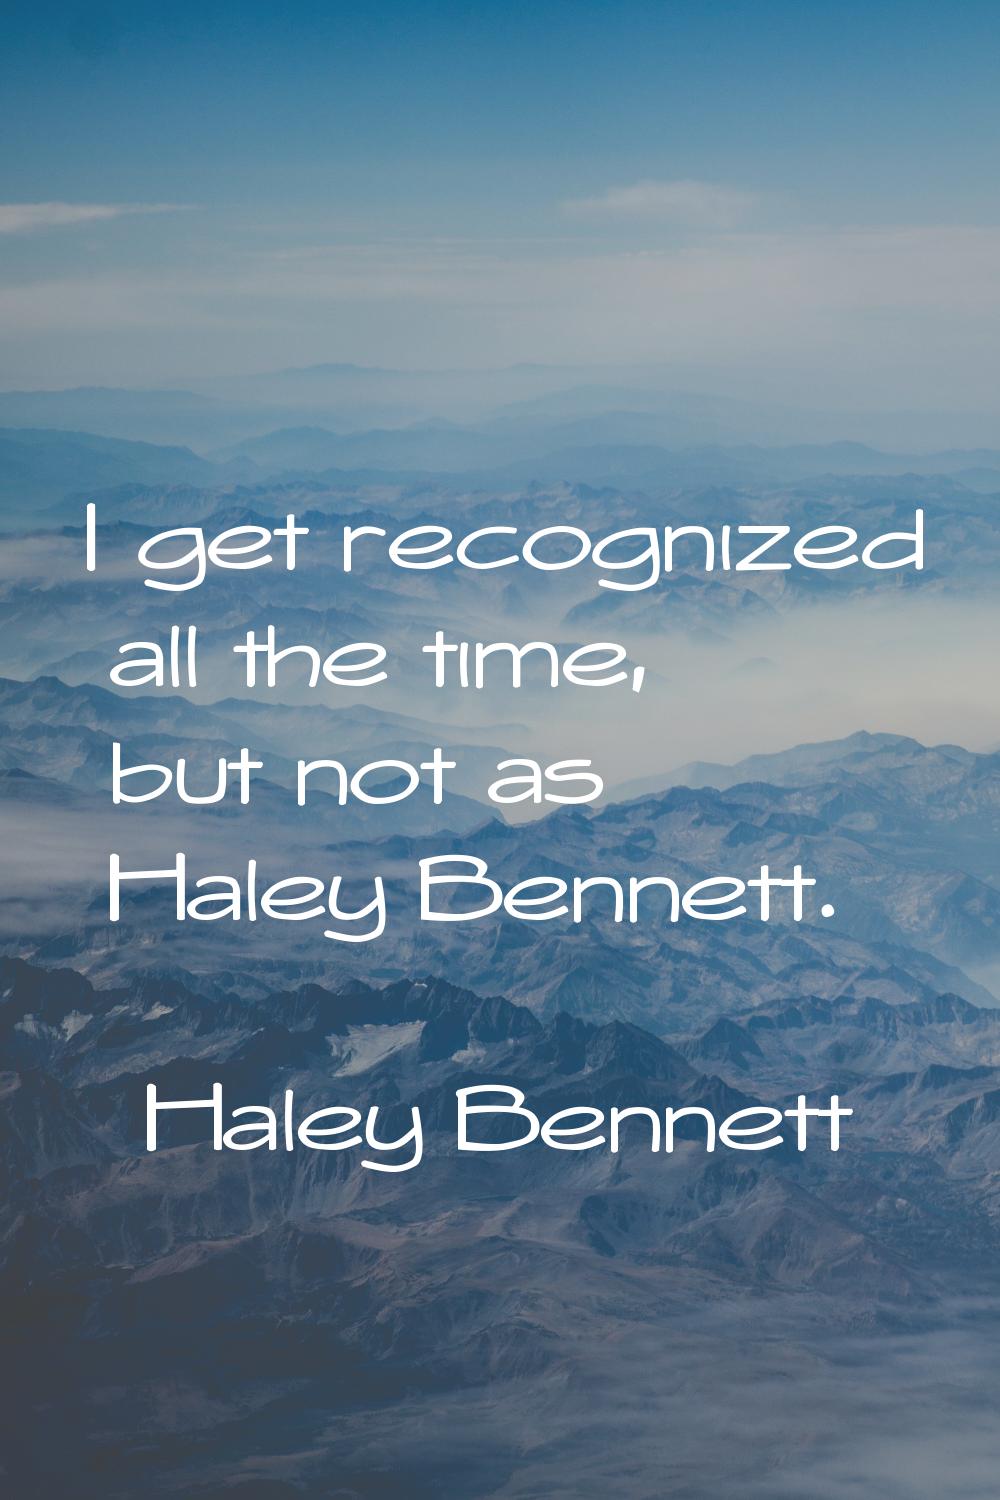 I get recognized all the time, but not as Haley Bennett.